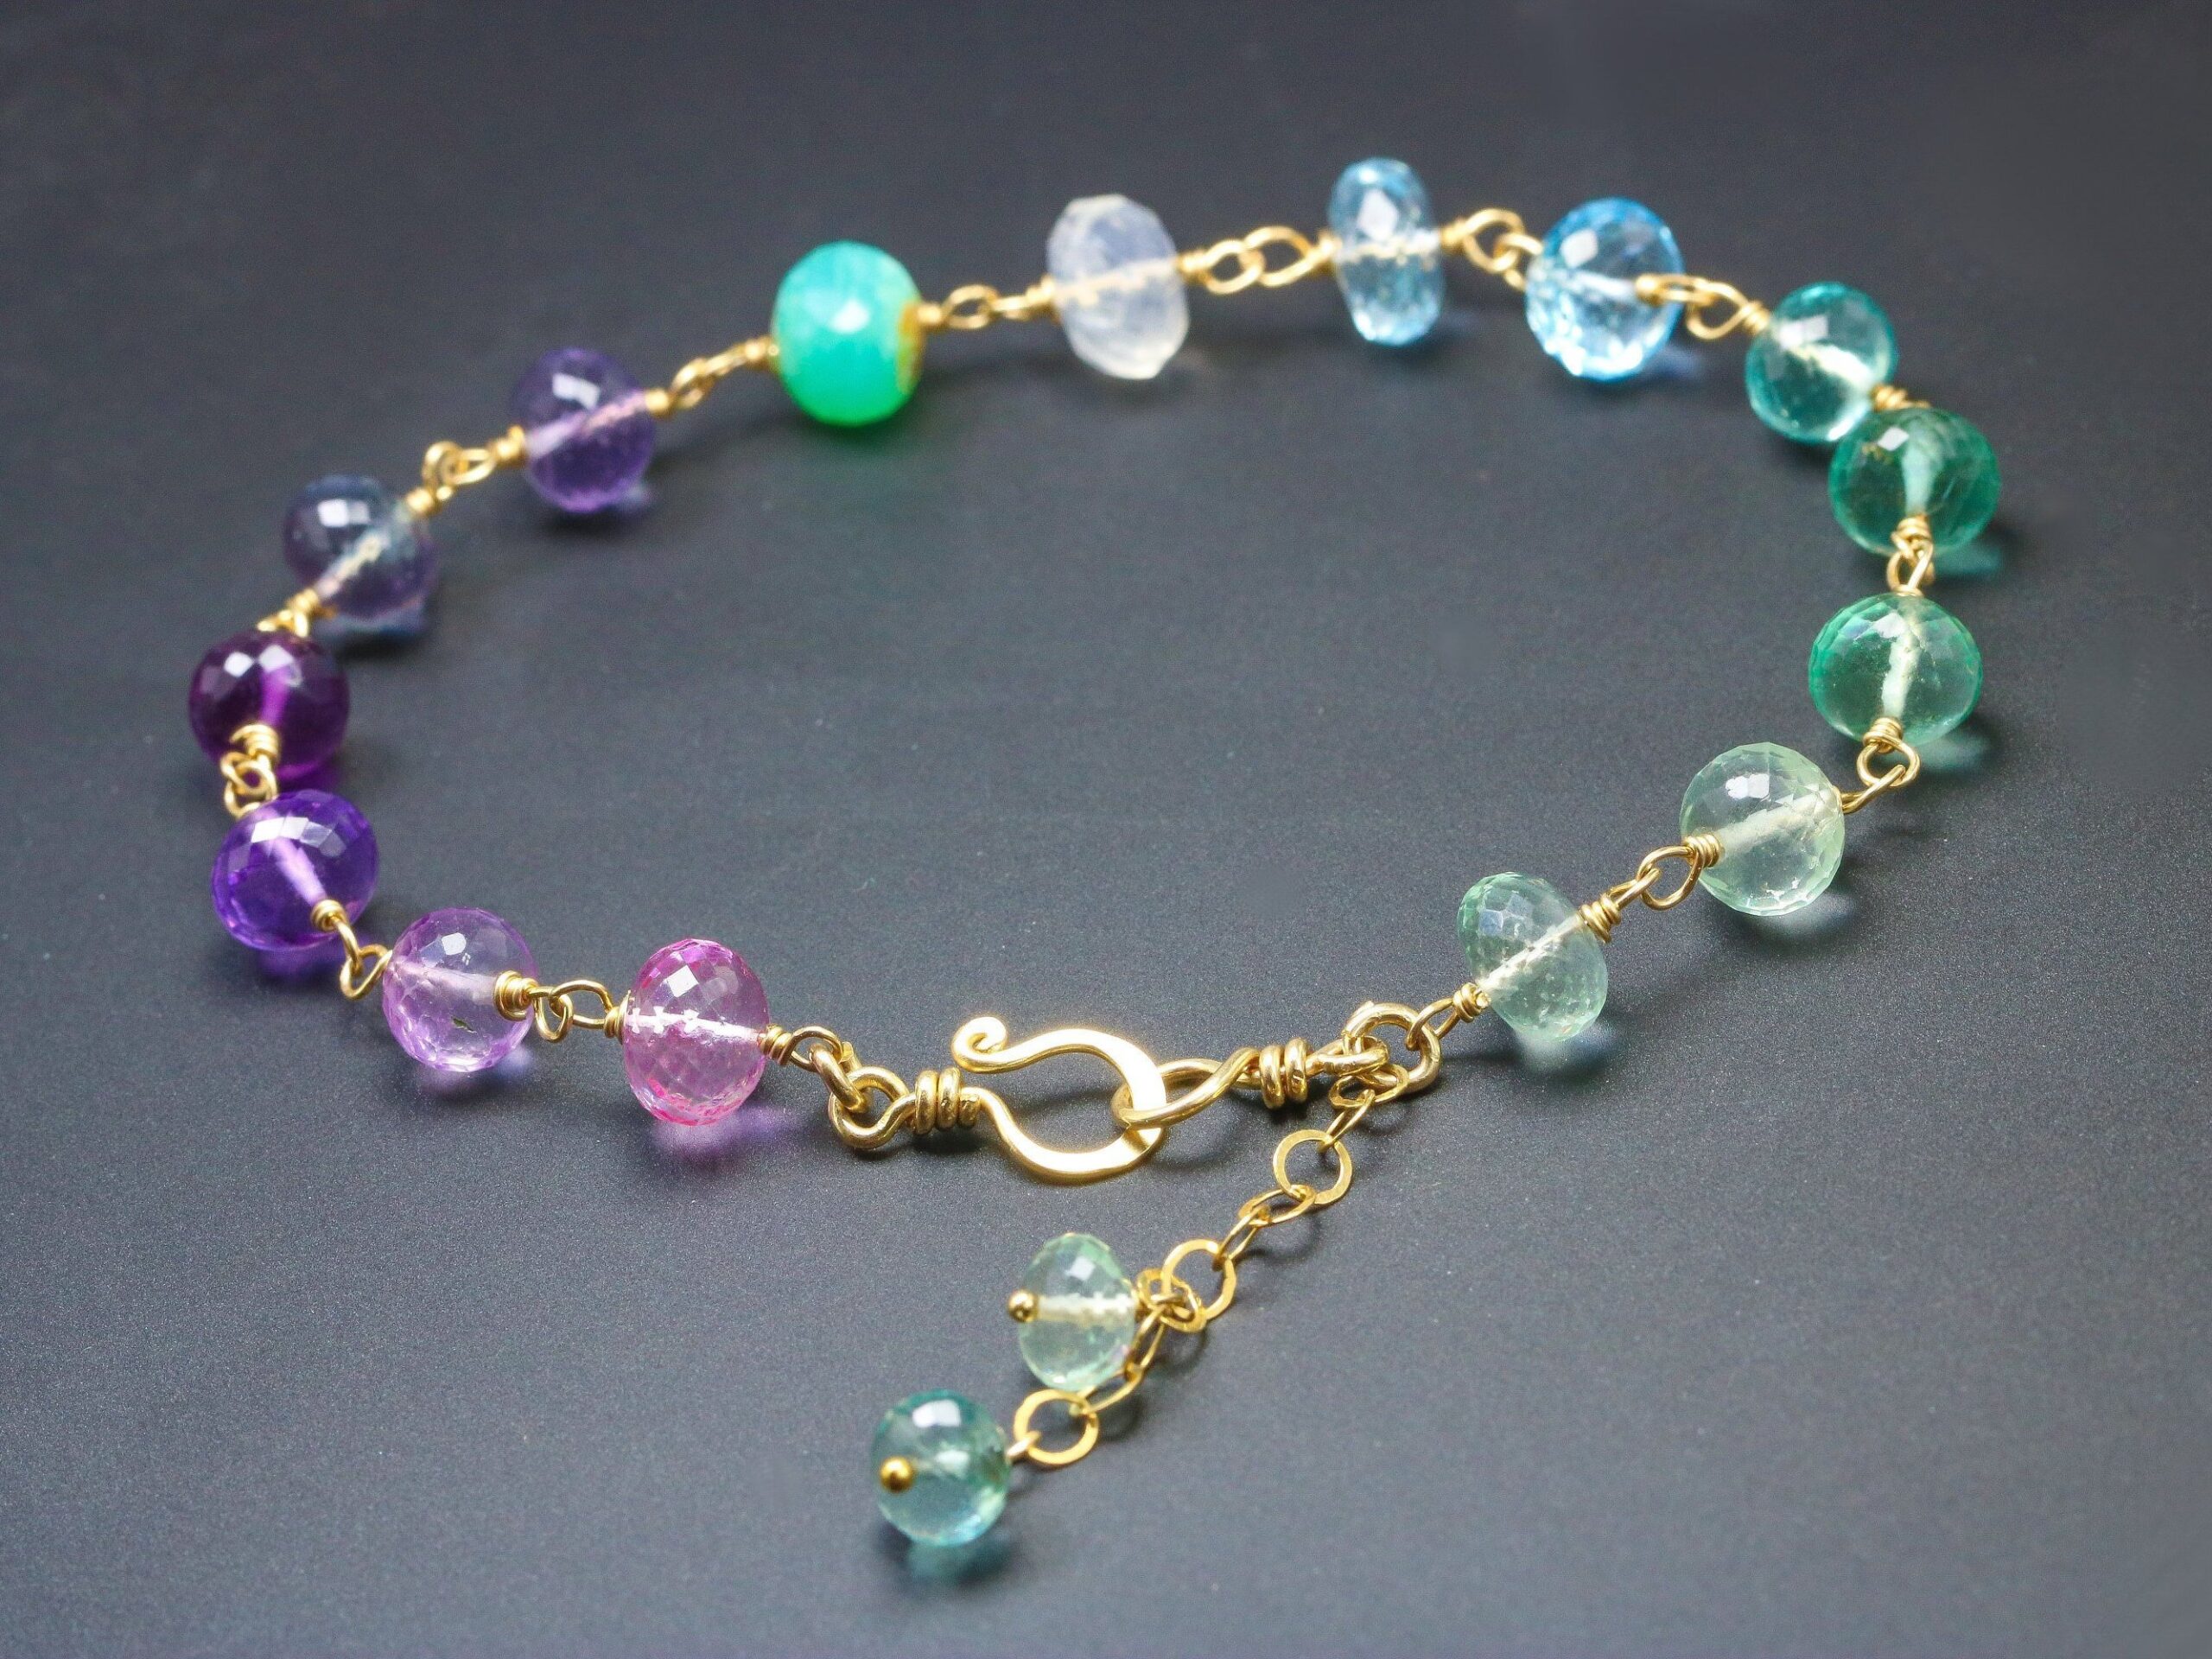 Precious Multi Gemstone Bracelet Wire Wrapped in Gold Filled